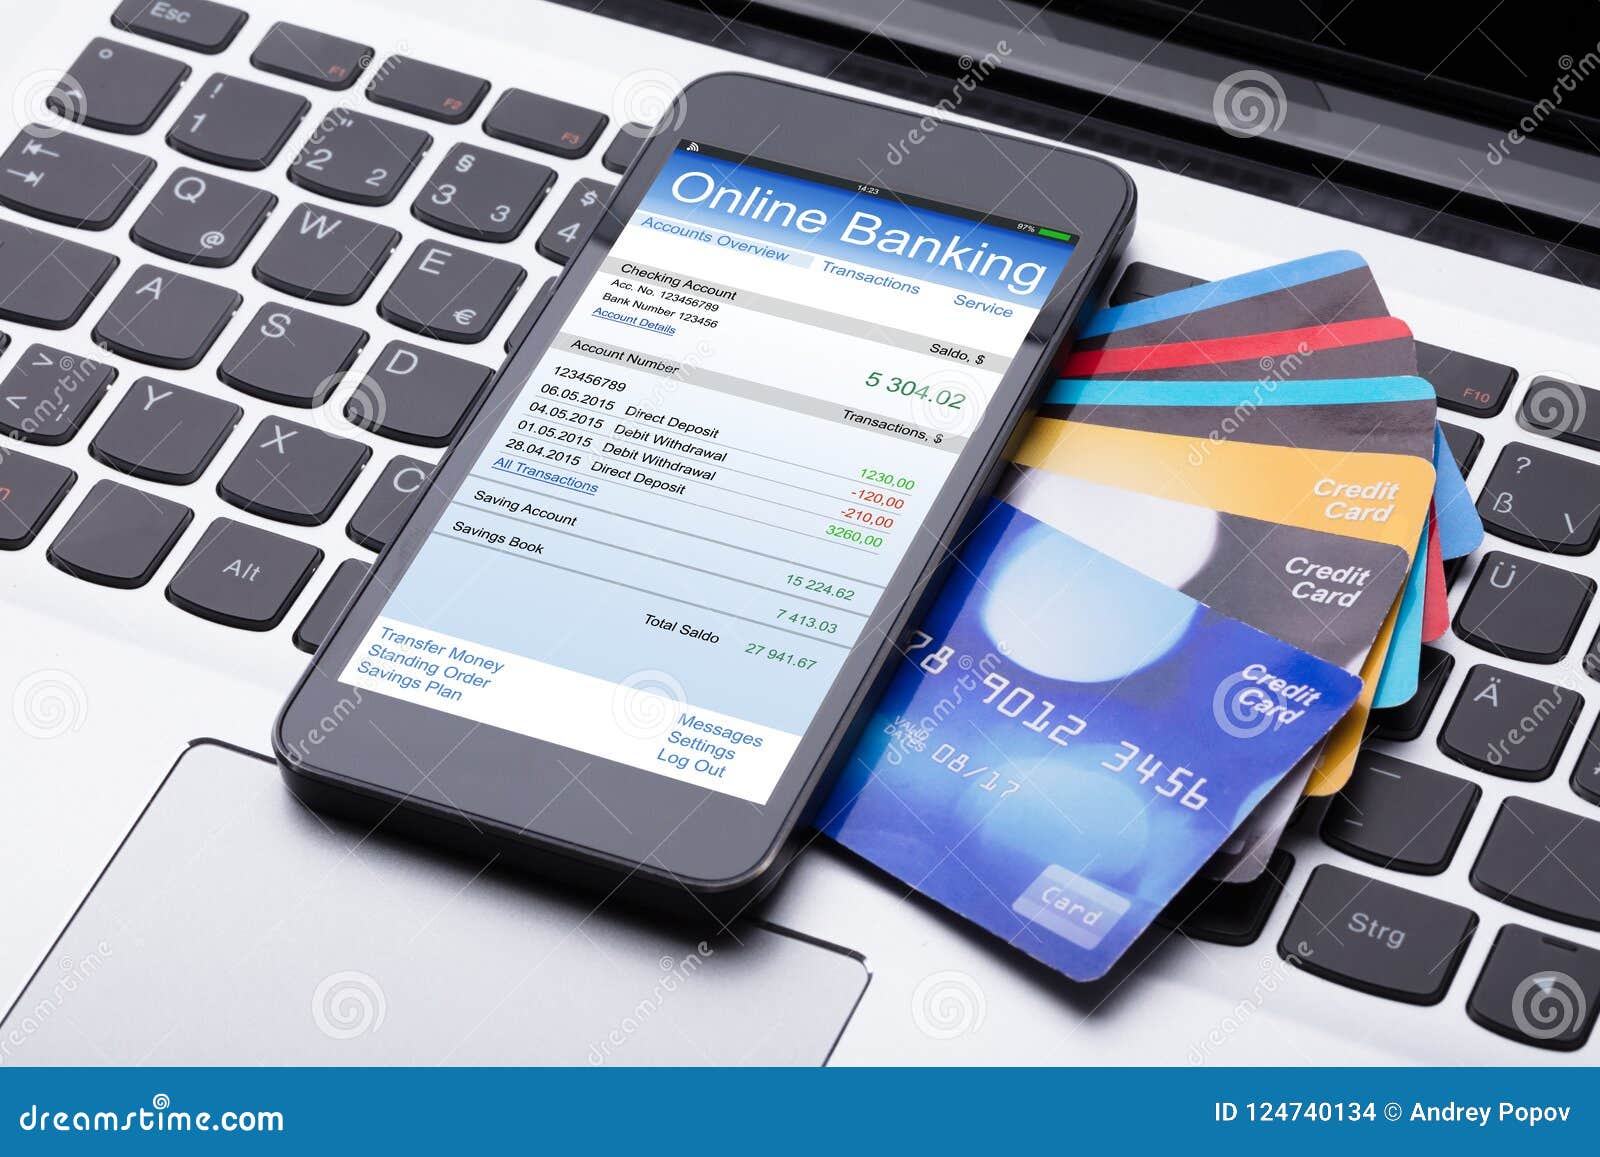 mobilephone with online banking app